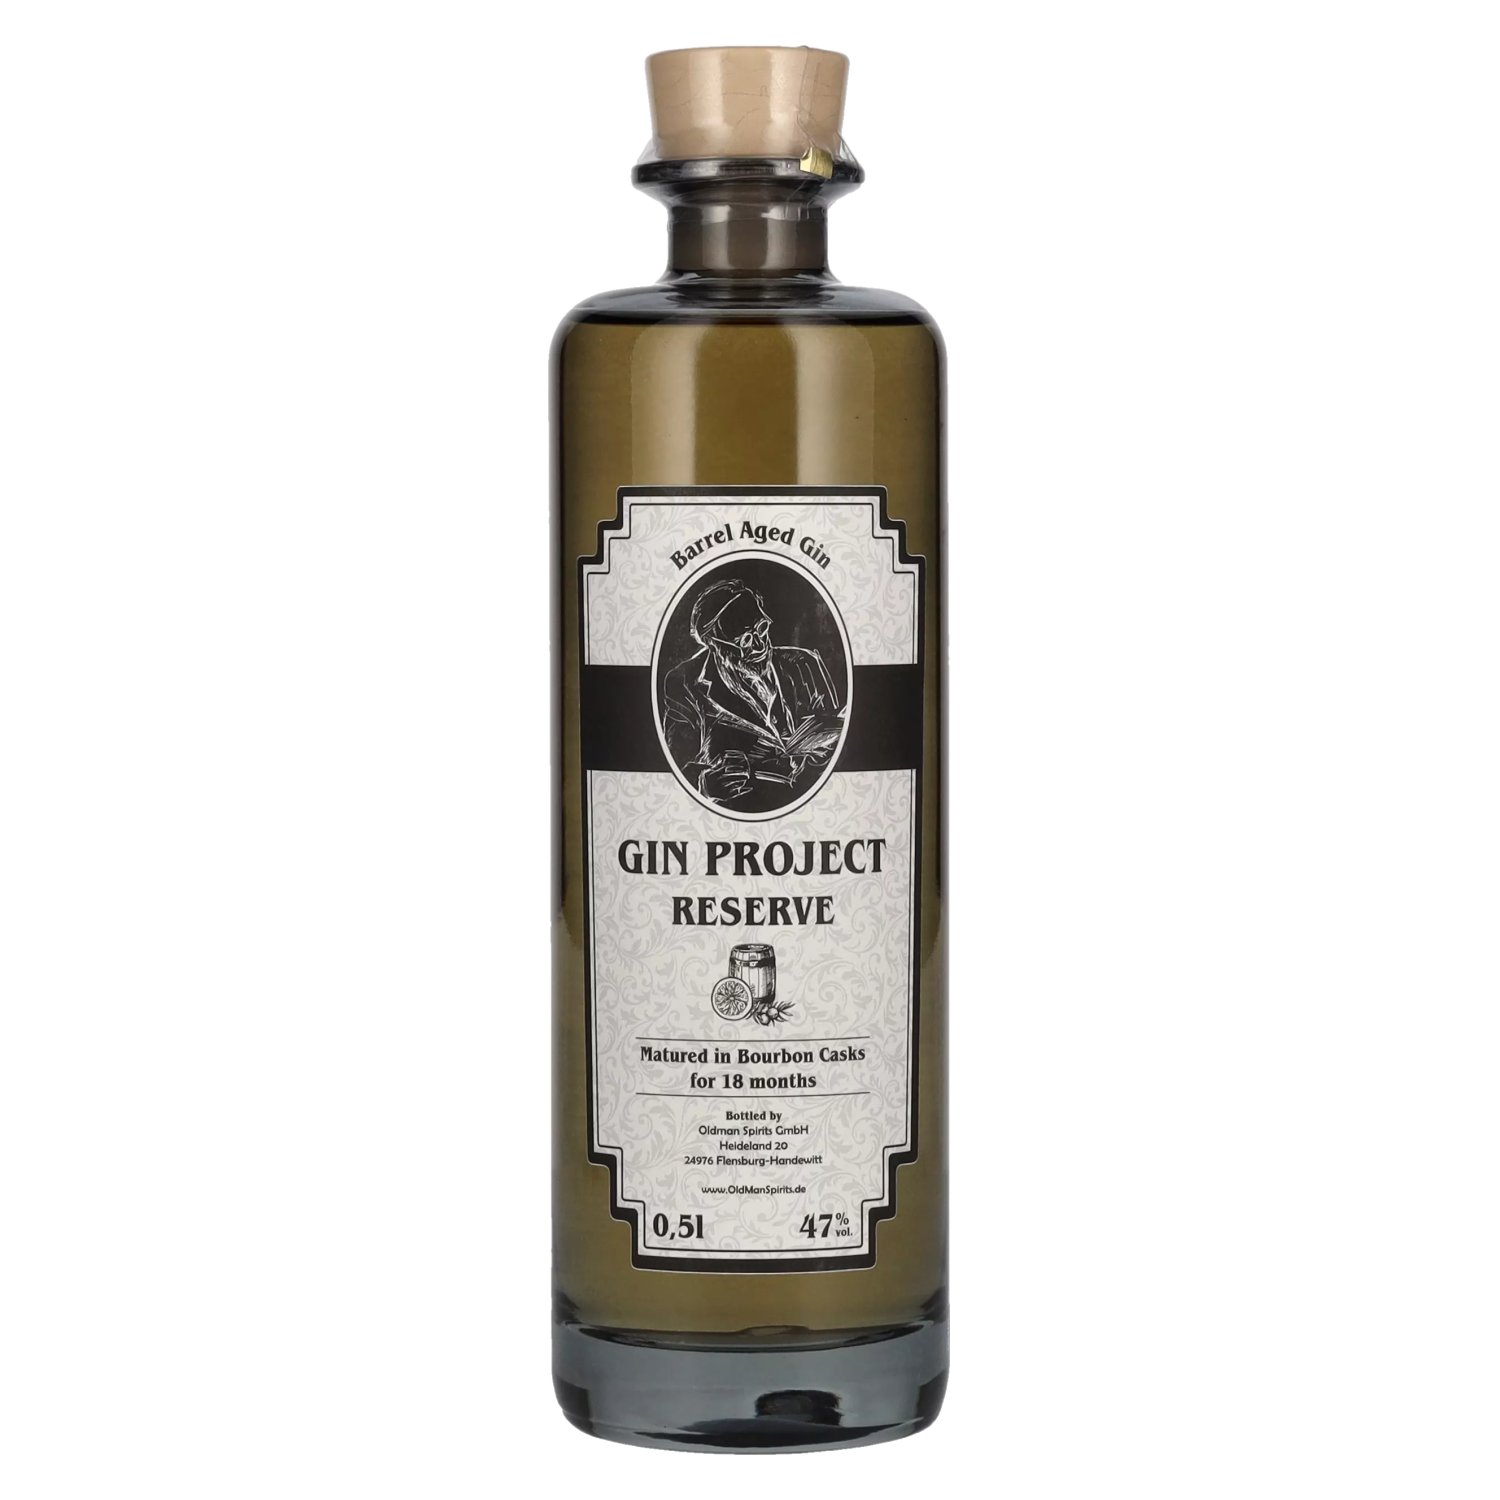 Spirits of Old Man Aged 0,5l Vol. Barrel 47% RESERVE PROJECT Gin Gin